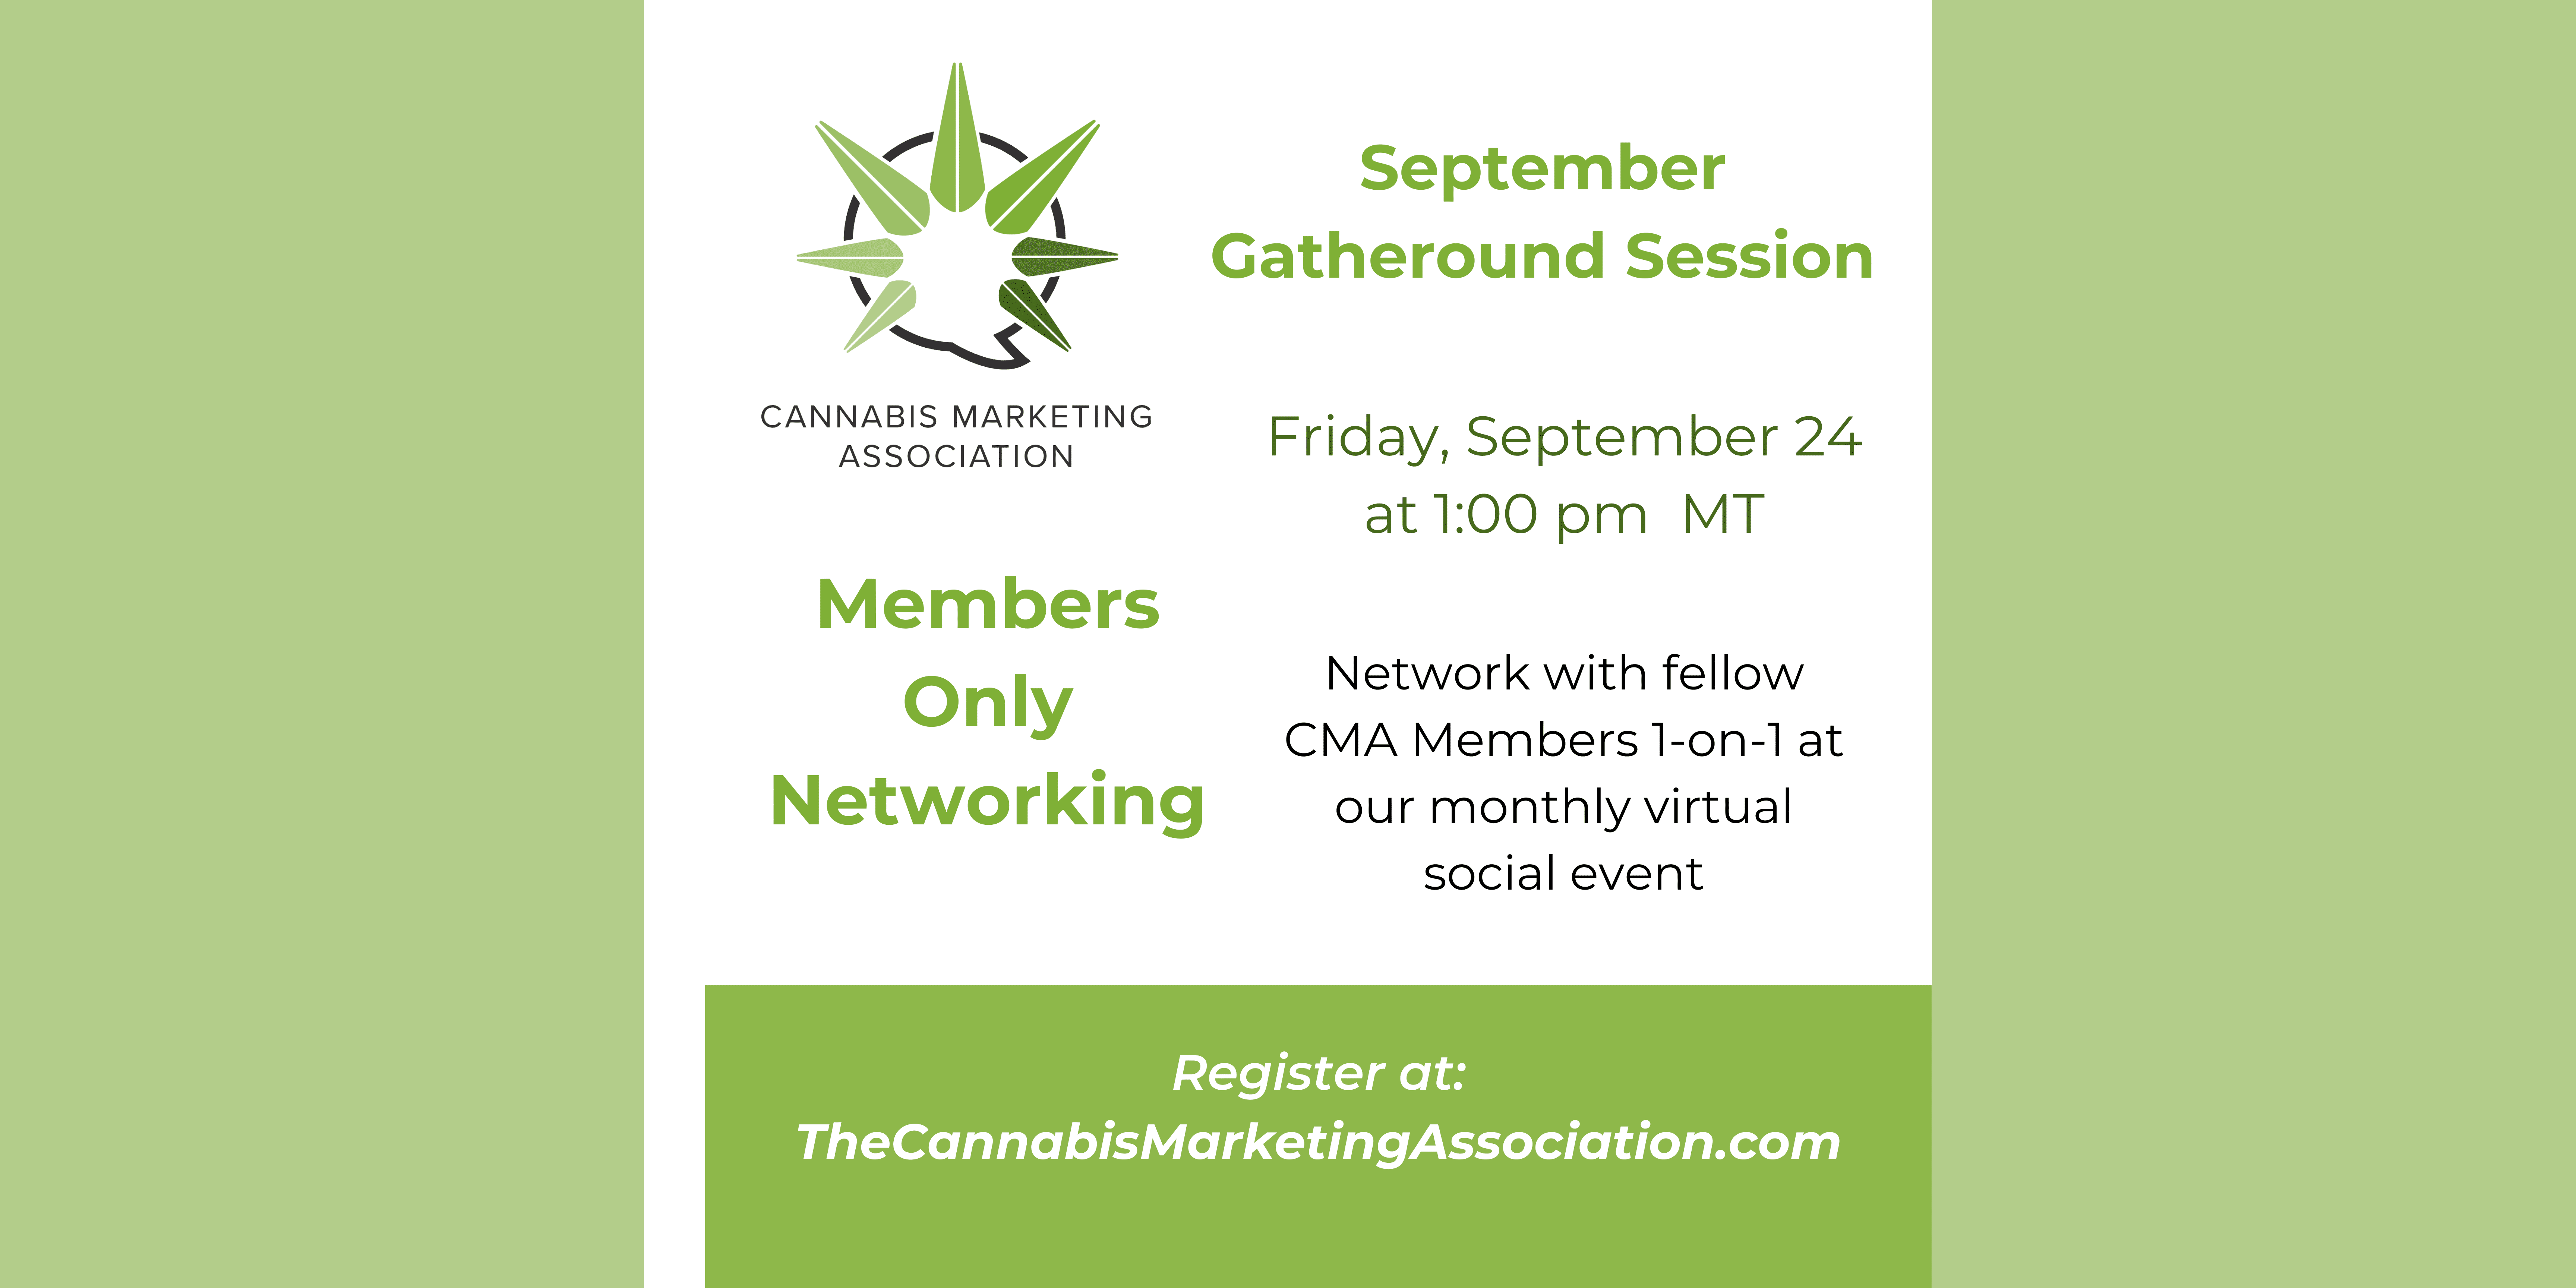 Members-Only Networking Session September 2021